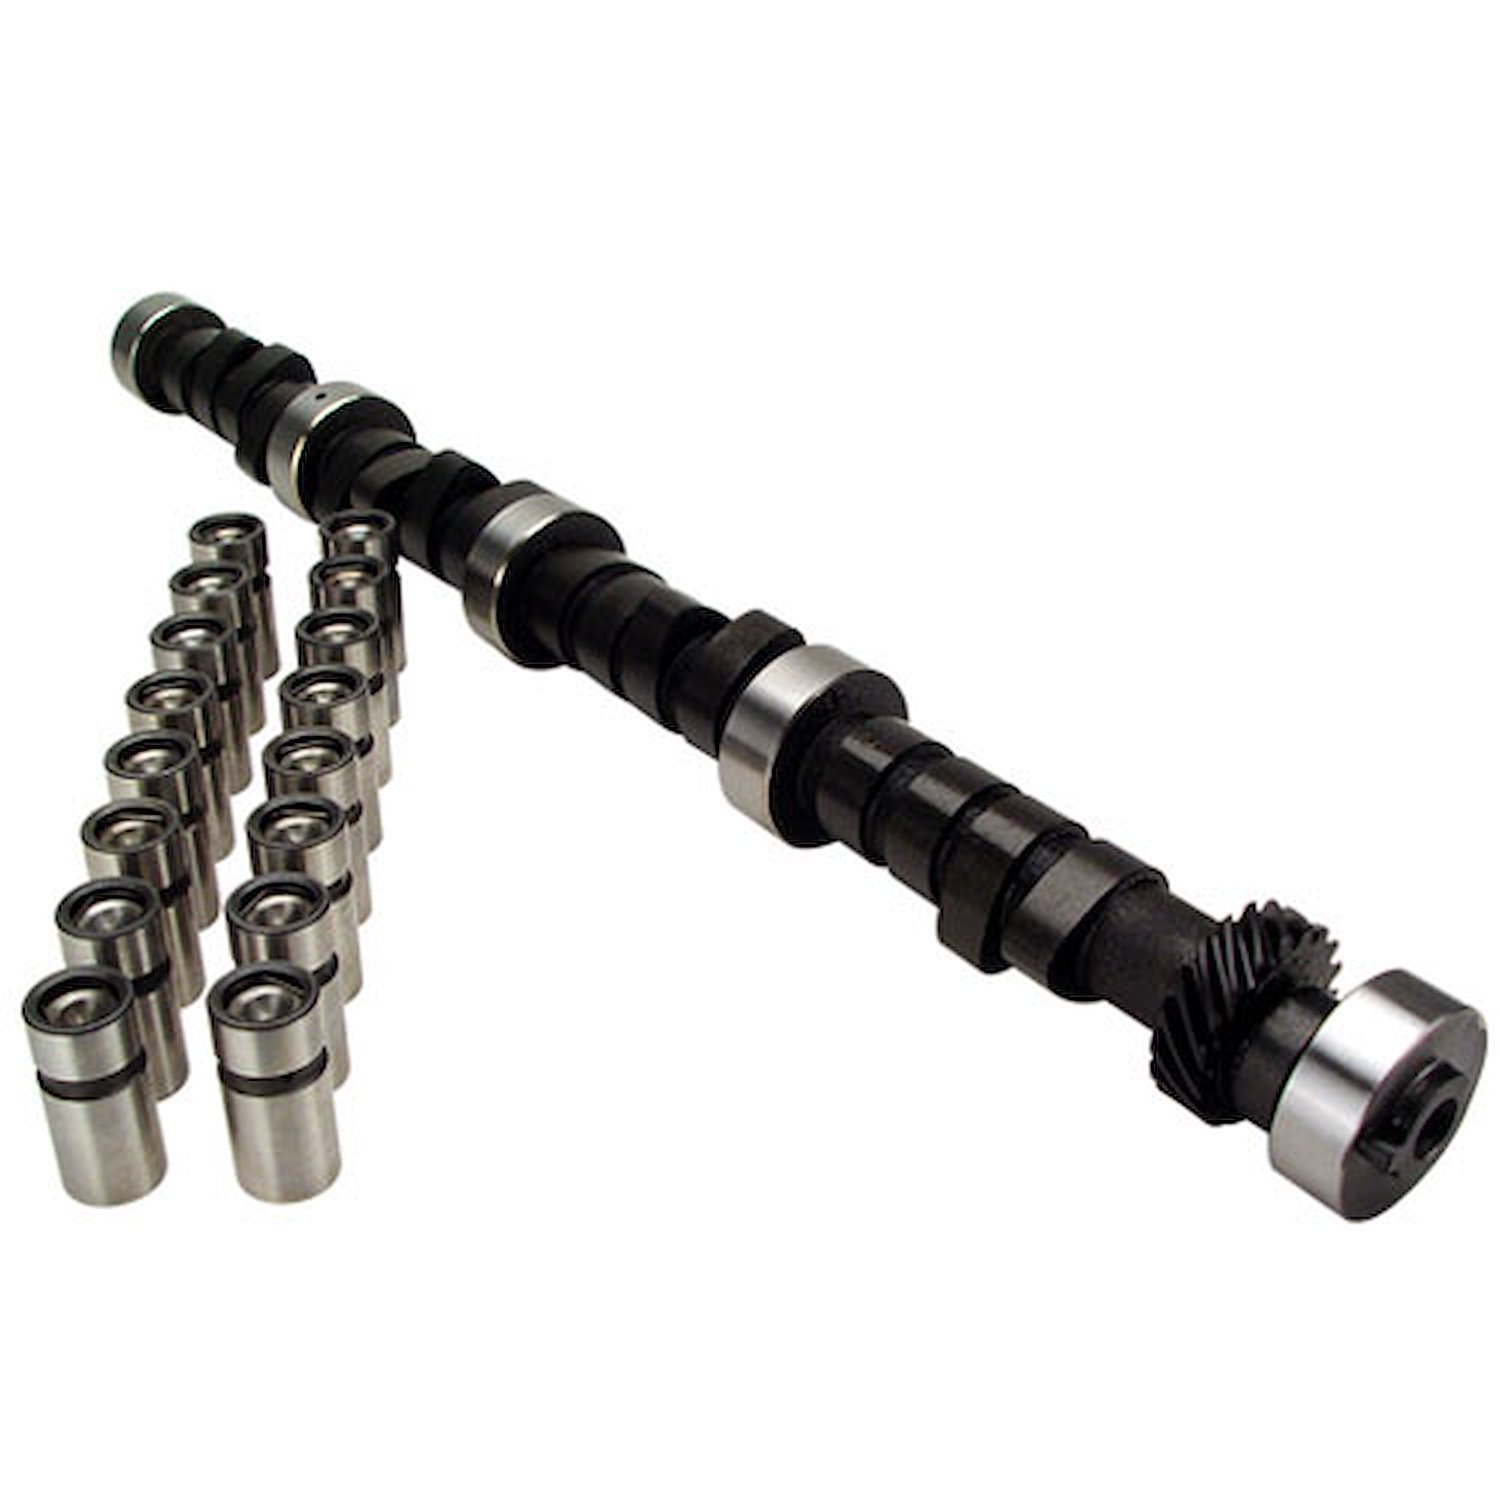 Xtreme Energy 284H Hydraulic Flat Tappet Camshaft & Lifter Kit Lift: .507" /.510" Duration: 284°/296° RPM Range: 2300-6500